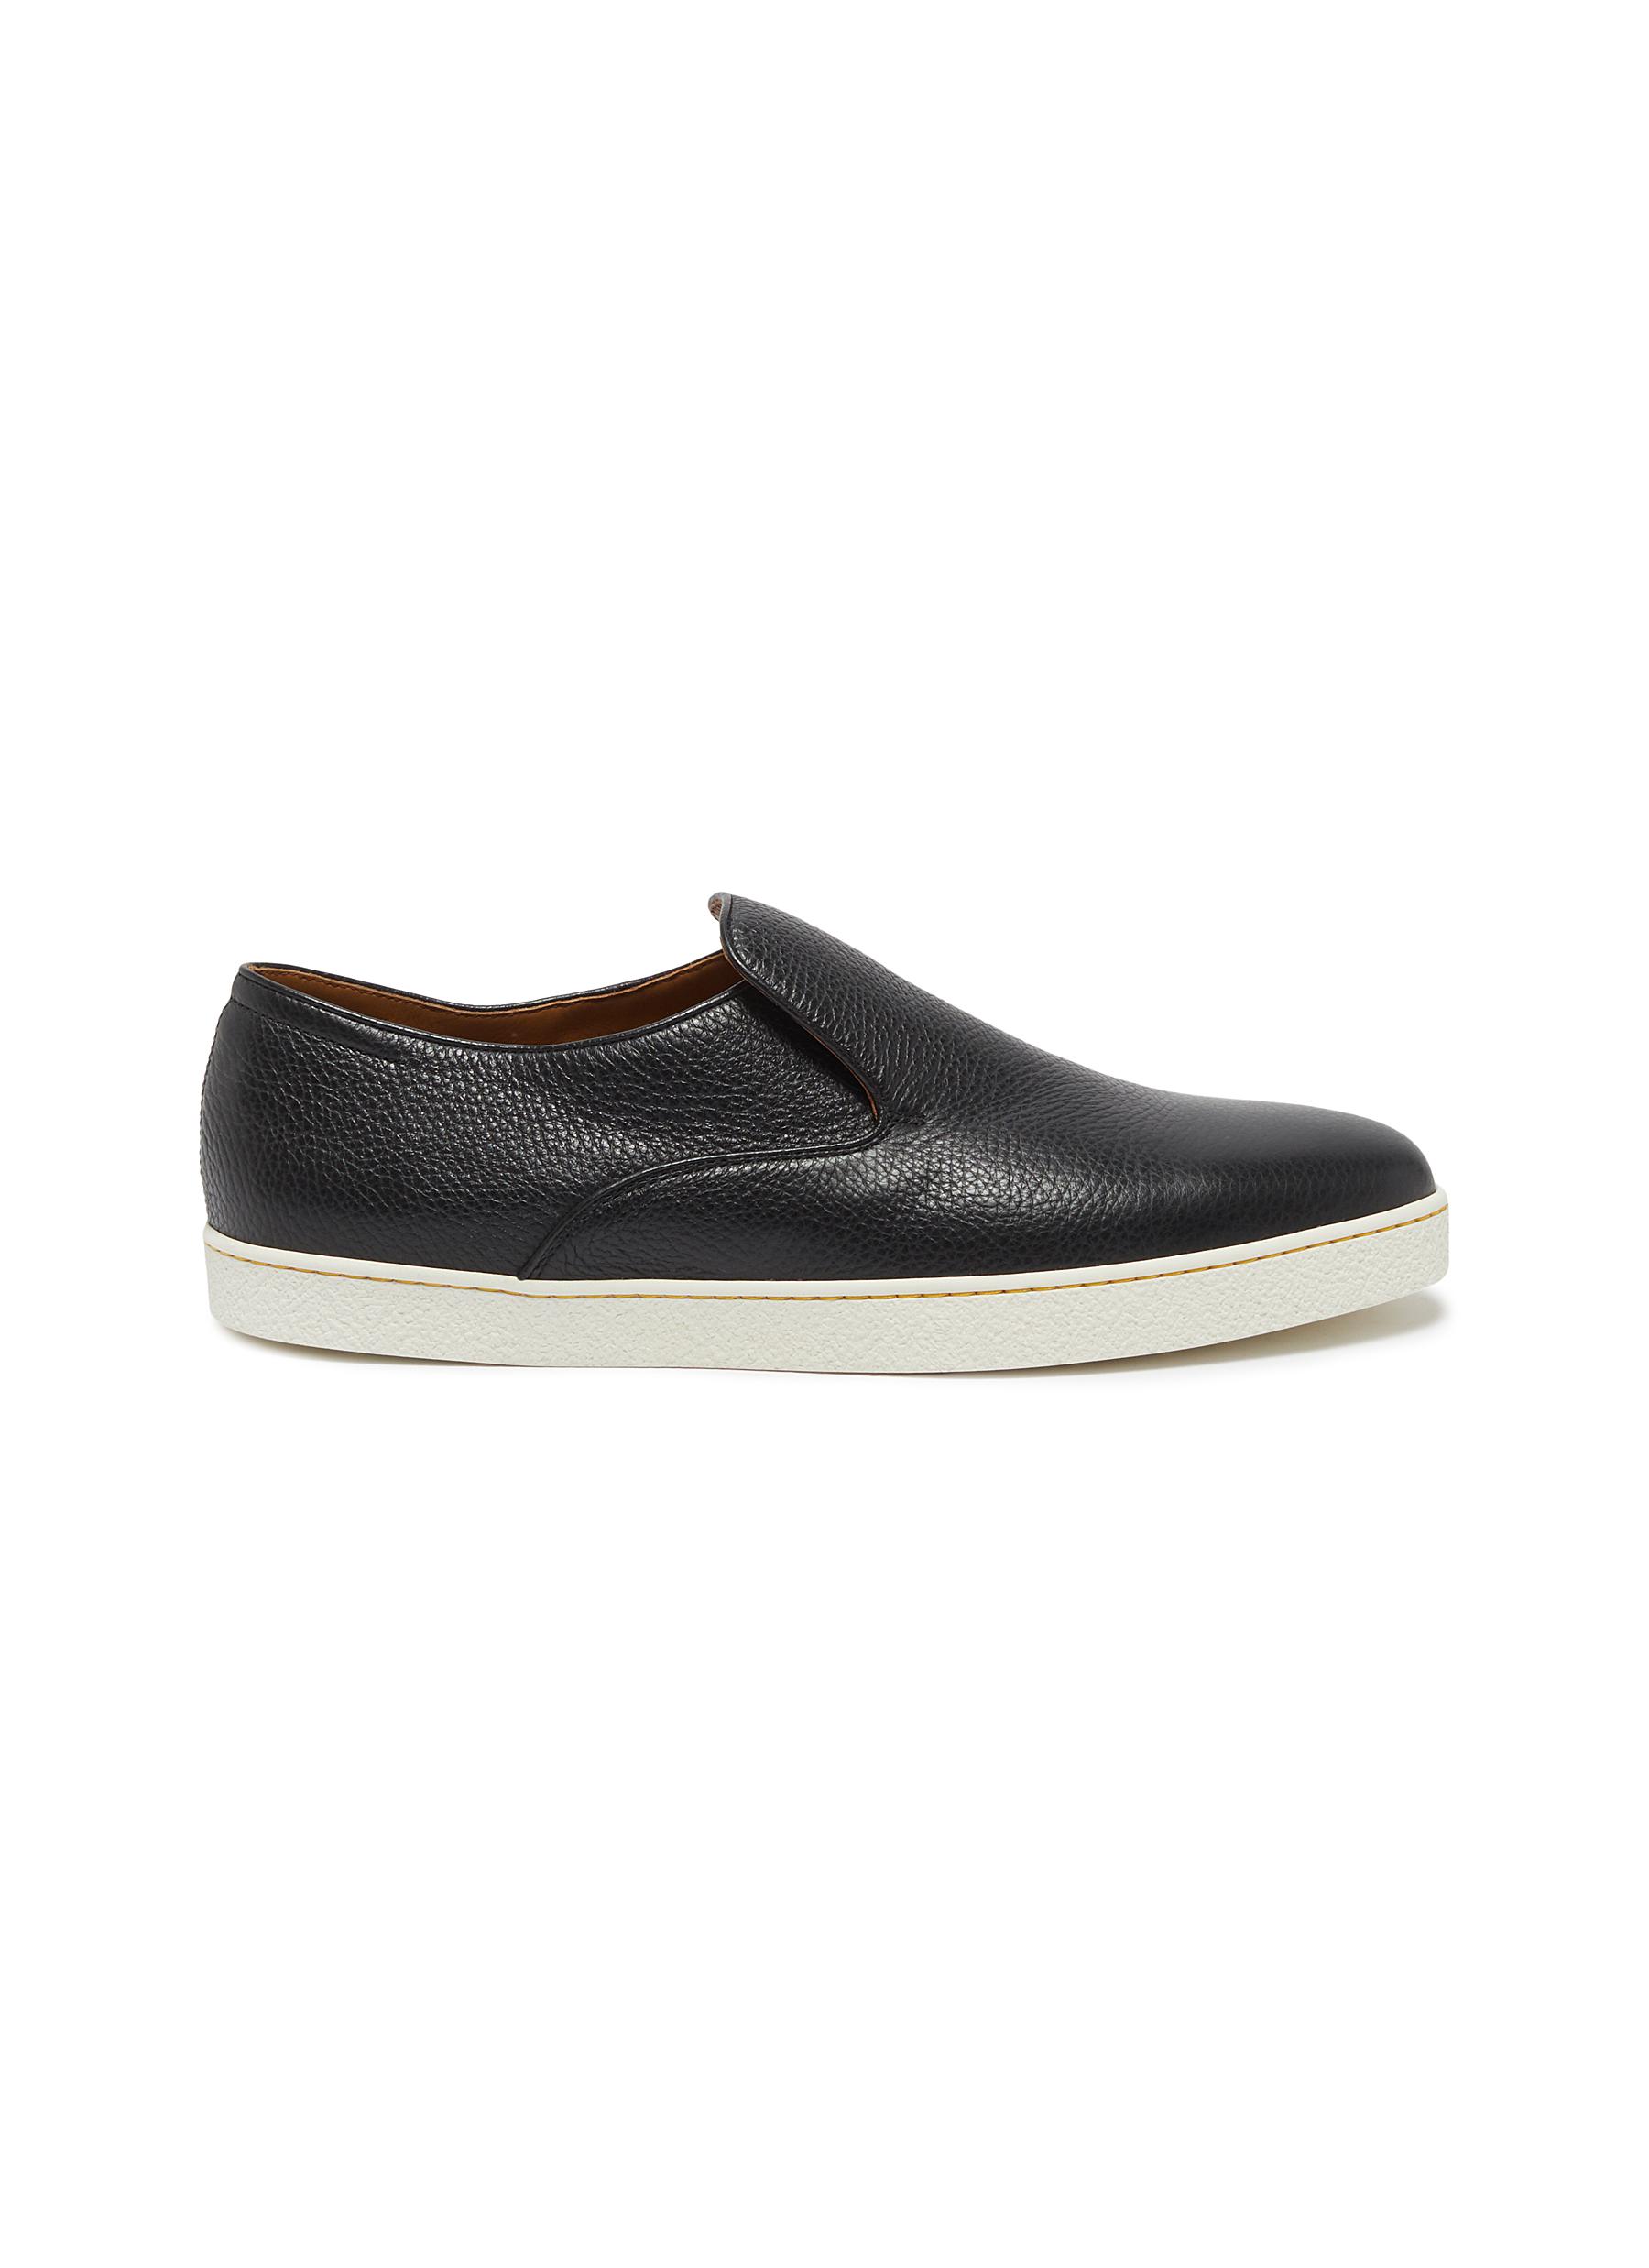 leather slip on loafers mens